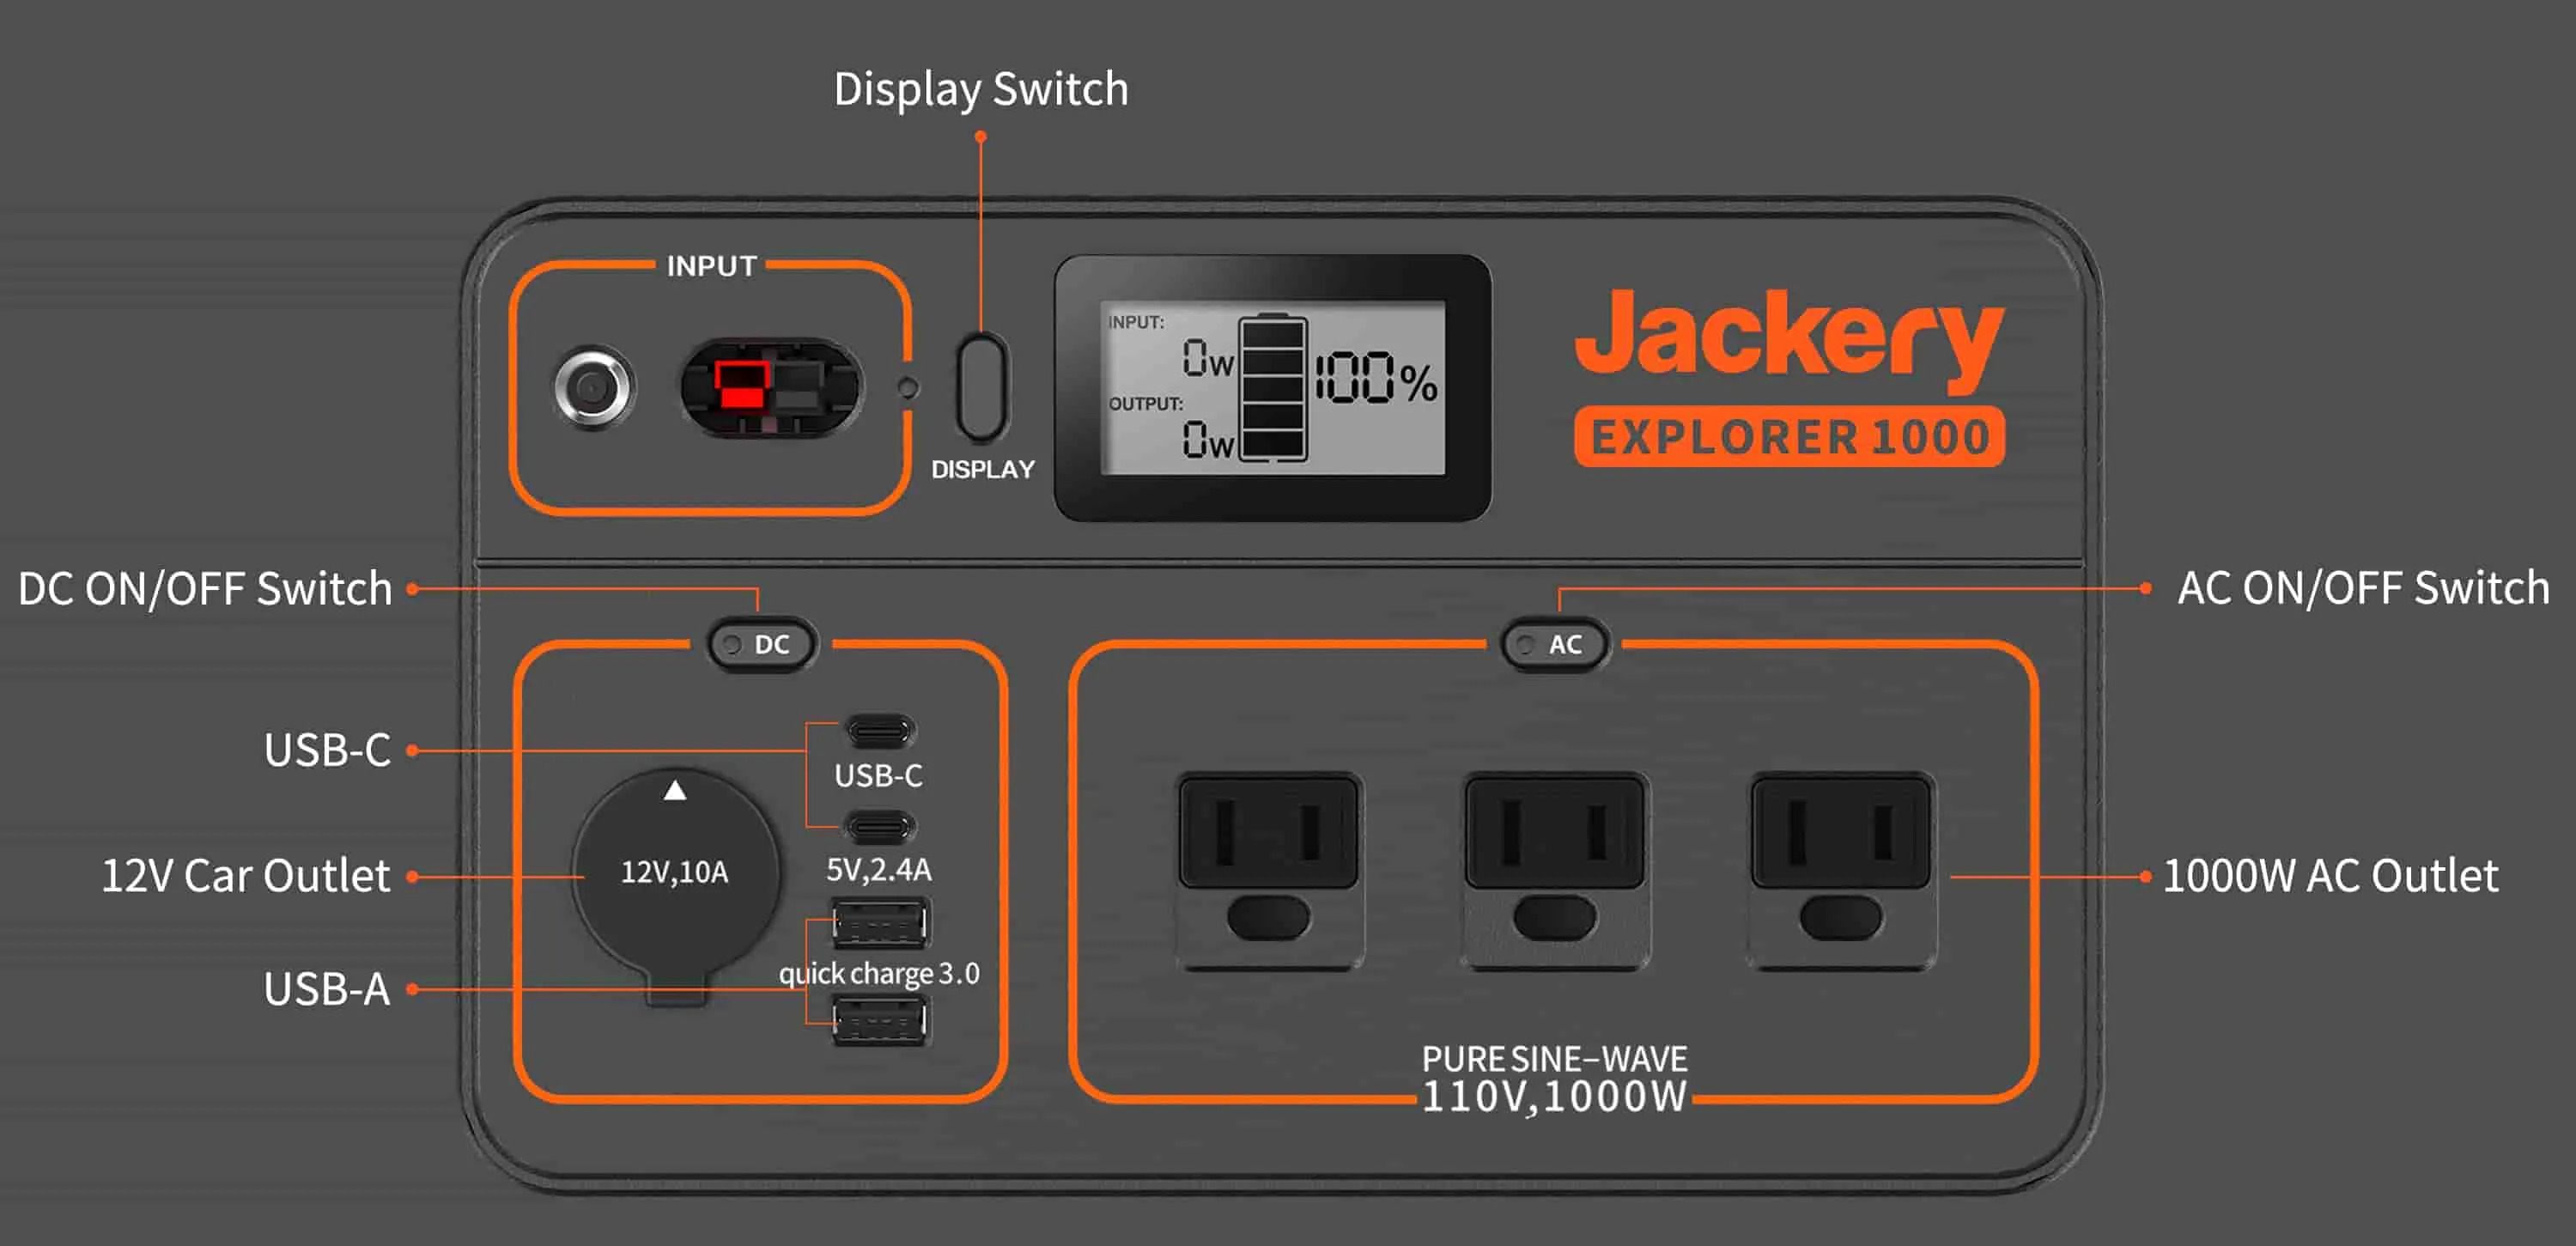 Jackery Explorer 1000 features 3 standard PURE SINE WAVE AC outlets, 2*USB-C and 1*Quick Charge 3.0 port.